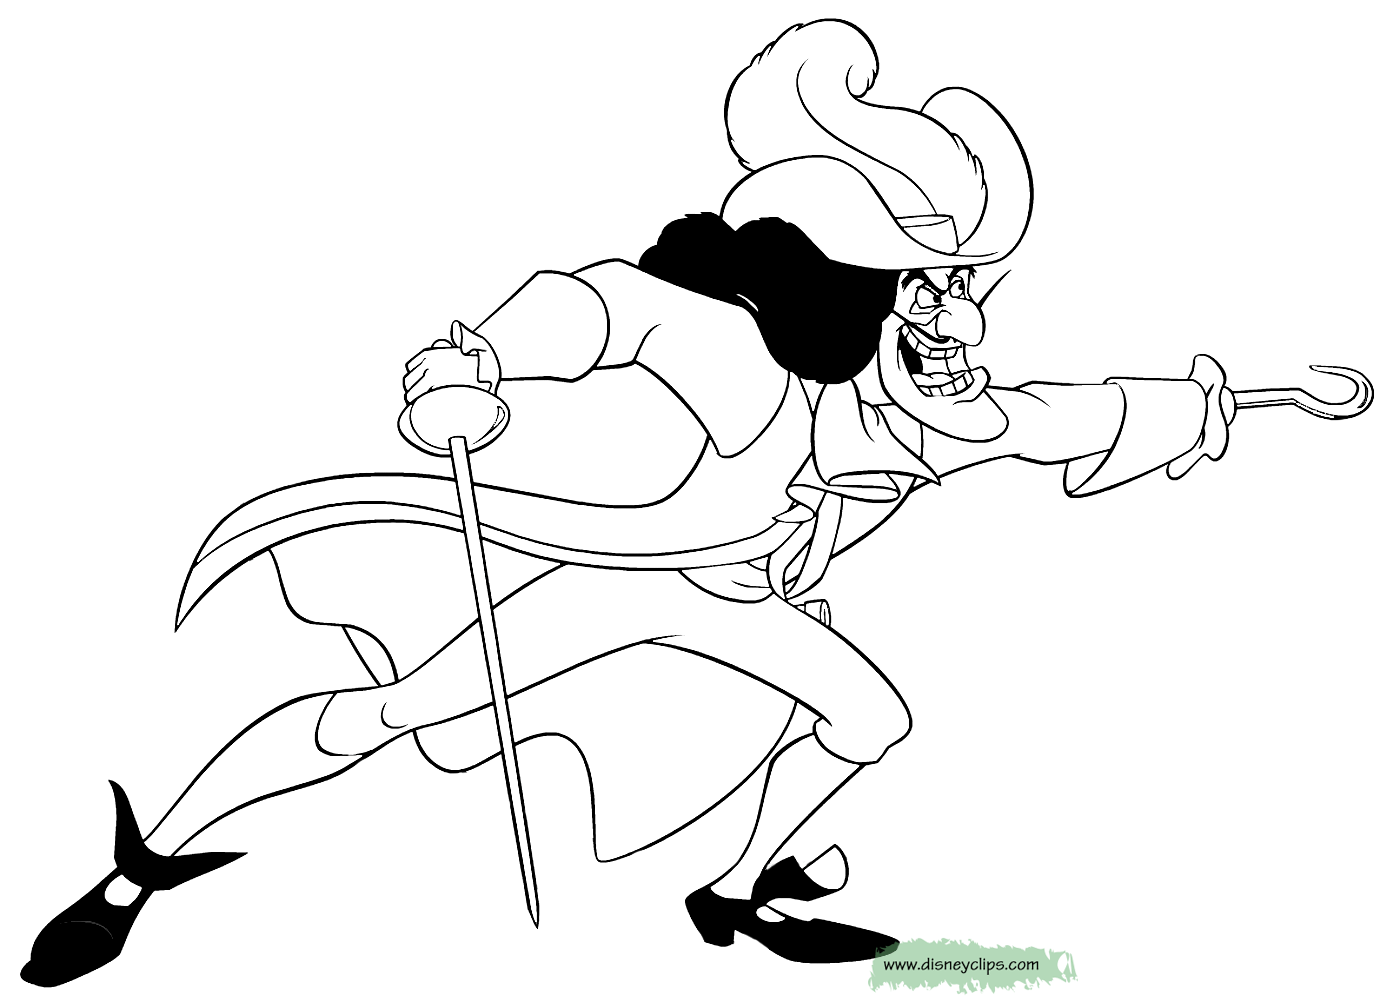 captain hook coloring pages - High Quality Coloring Pages